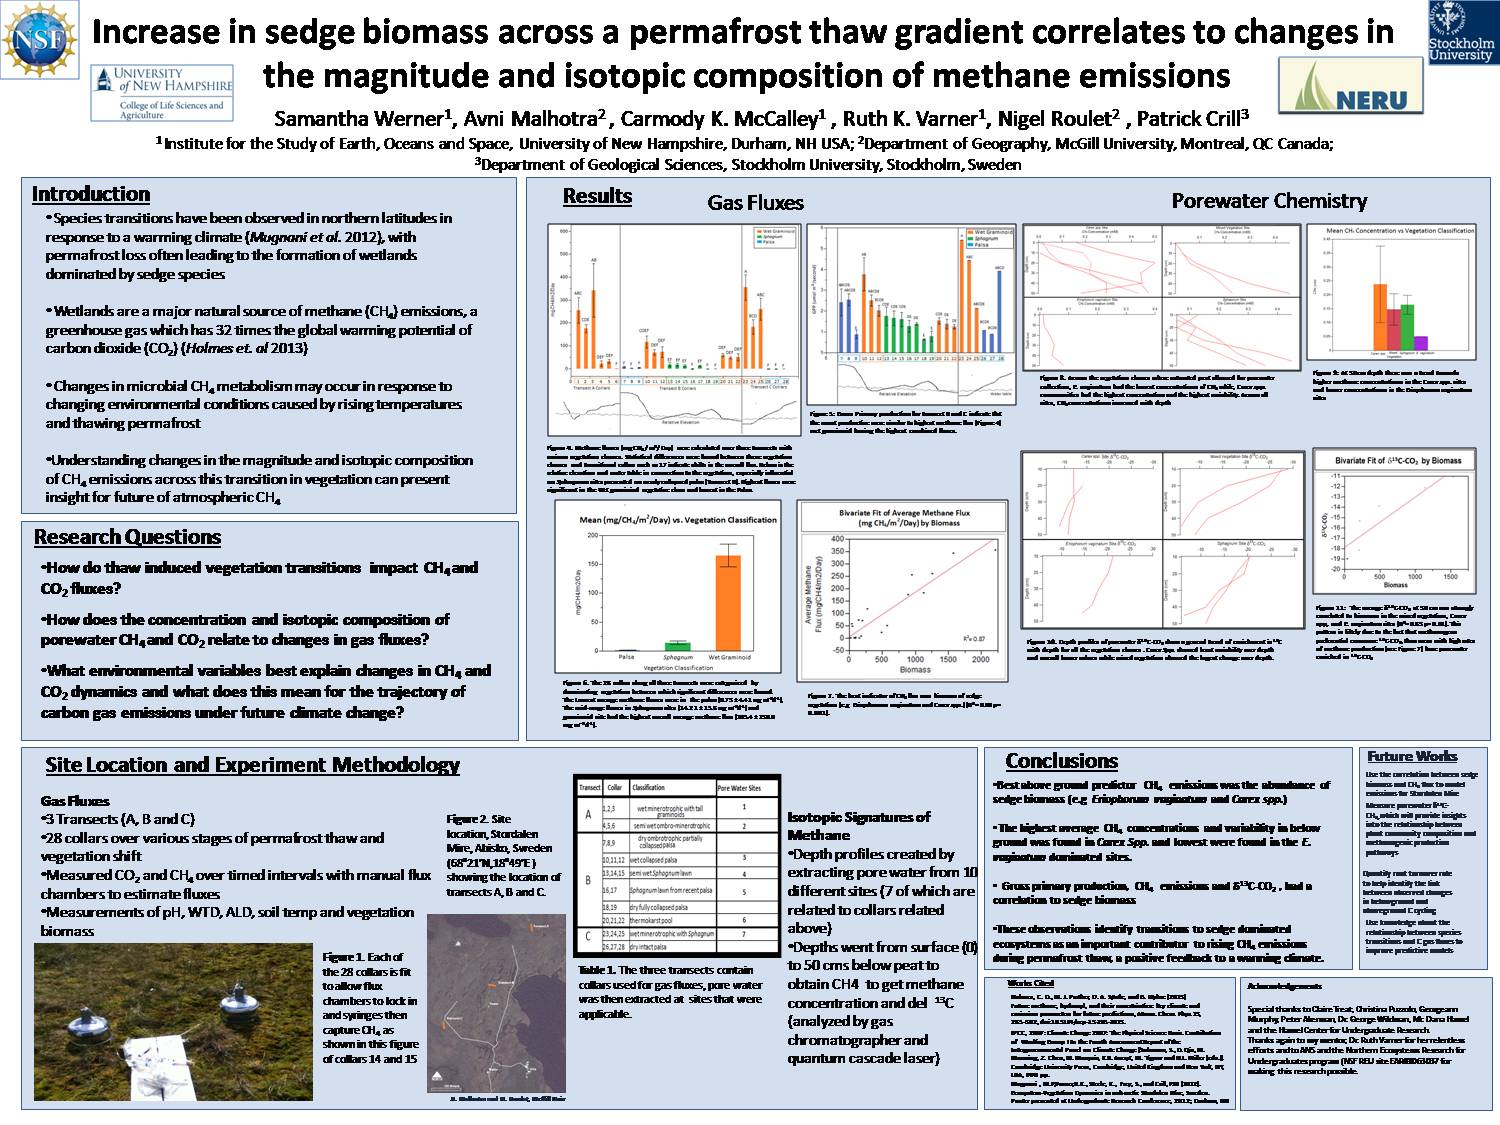 Increase In Sedge Biomass Across A Permafrost Thaw Gradient Correlates To Changes In  The Magnitude And Isotopic Composition Of Methane Emissions by Slq86